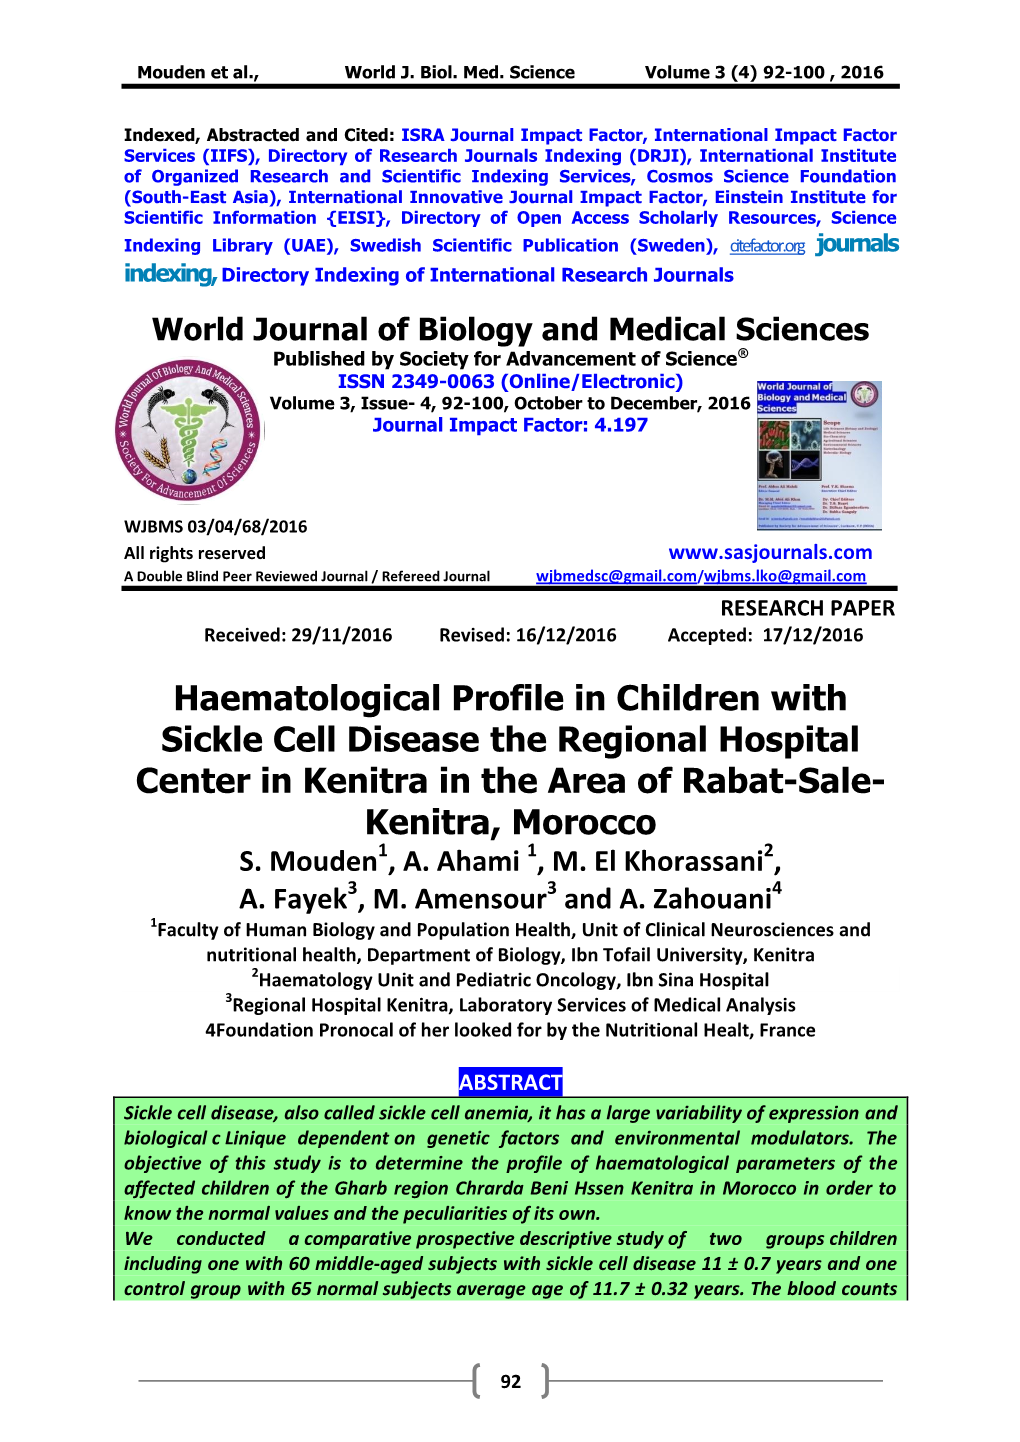 Haematological Profile in Children with Sickle Cell Disease the Regional Hospital Center in Kenitra in the Area of Rabat-Sale- Kenitra, Morocco S